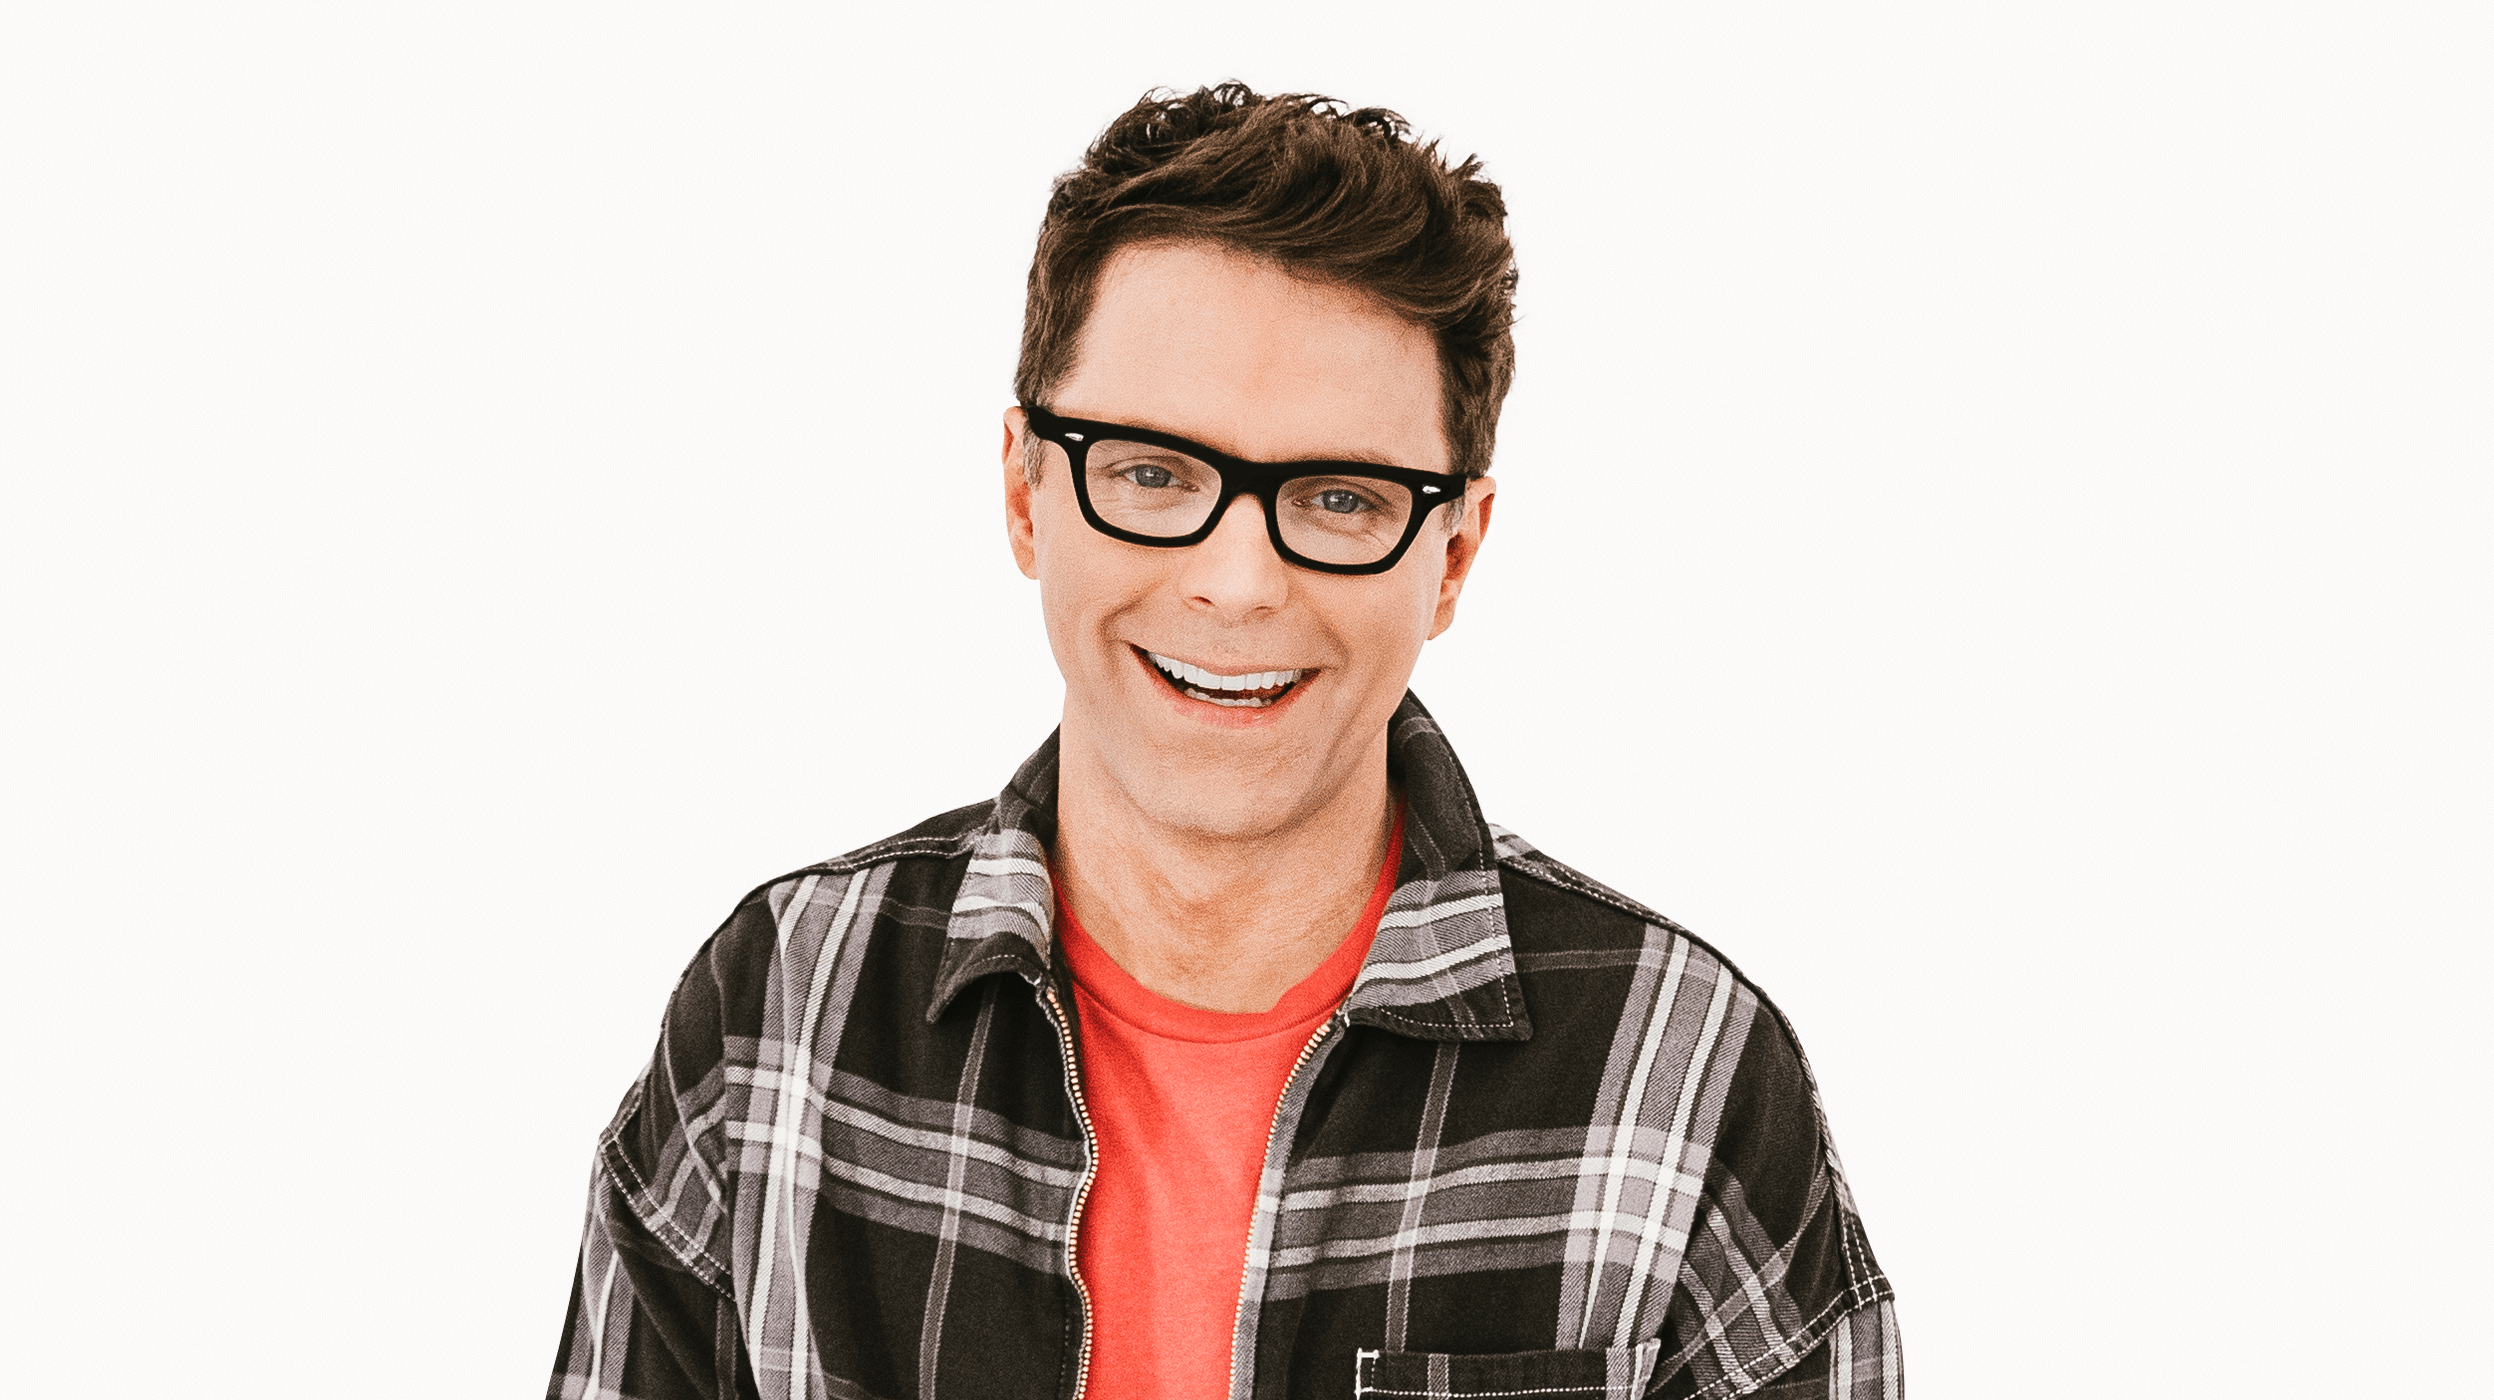 Bobby Bones Biography: Age, Net Worth, Parents, Spouse, Height, Instagram, TV Shows, Wiki